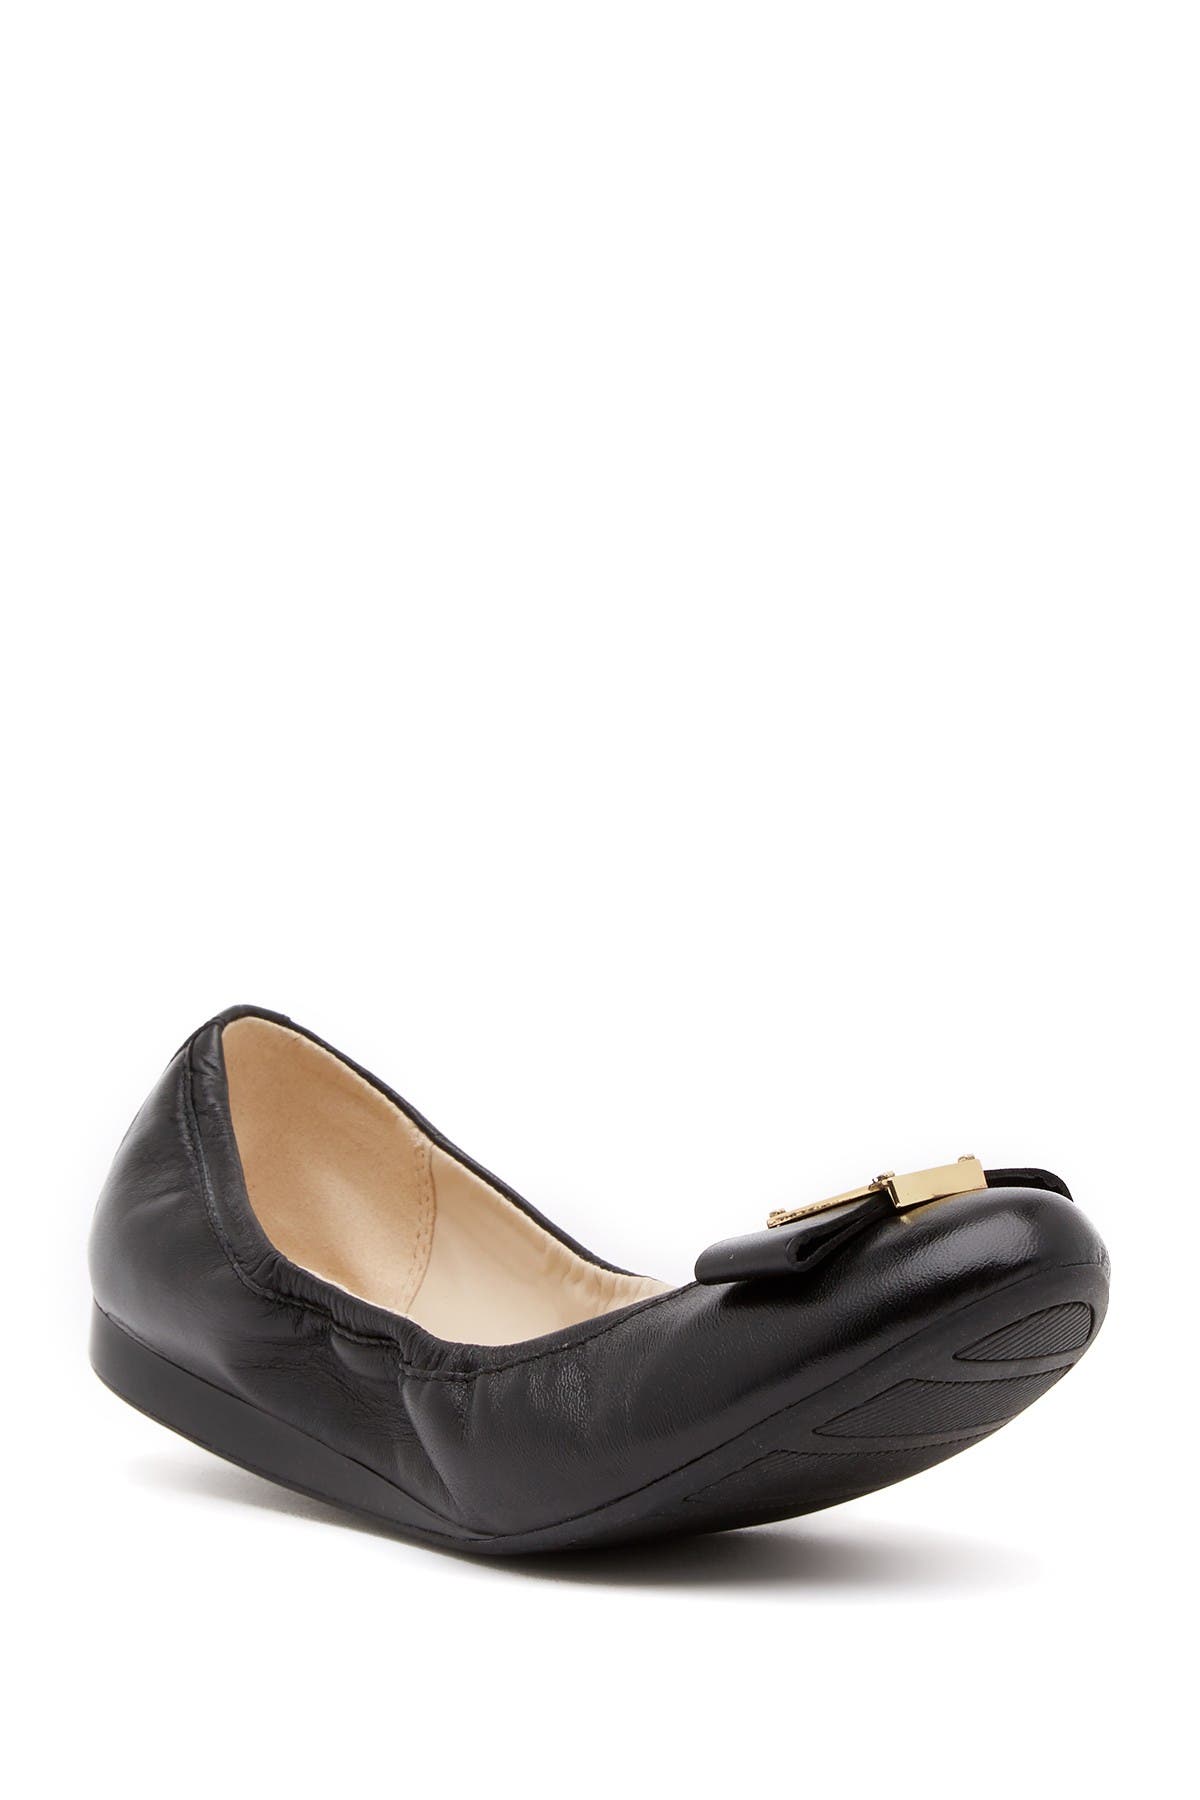 cole haan emory bow flat